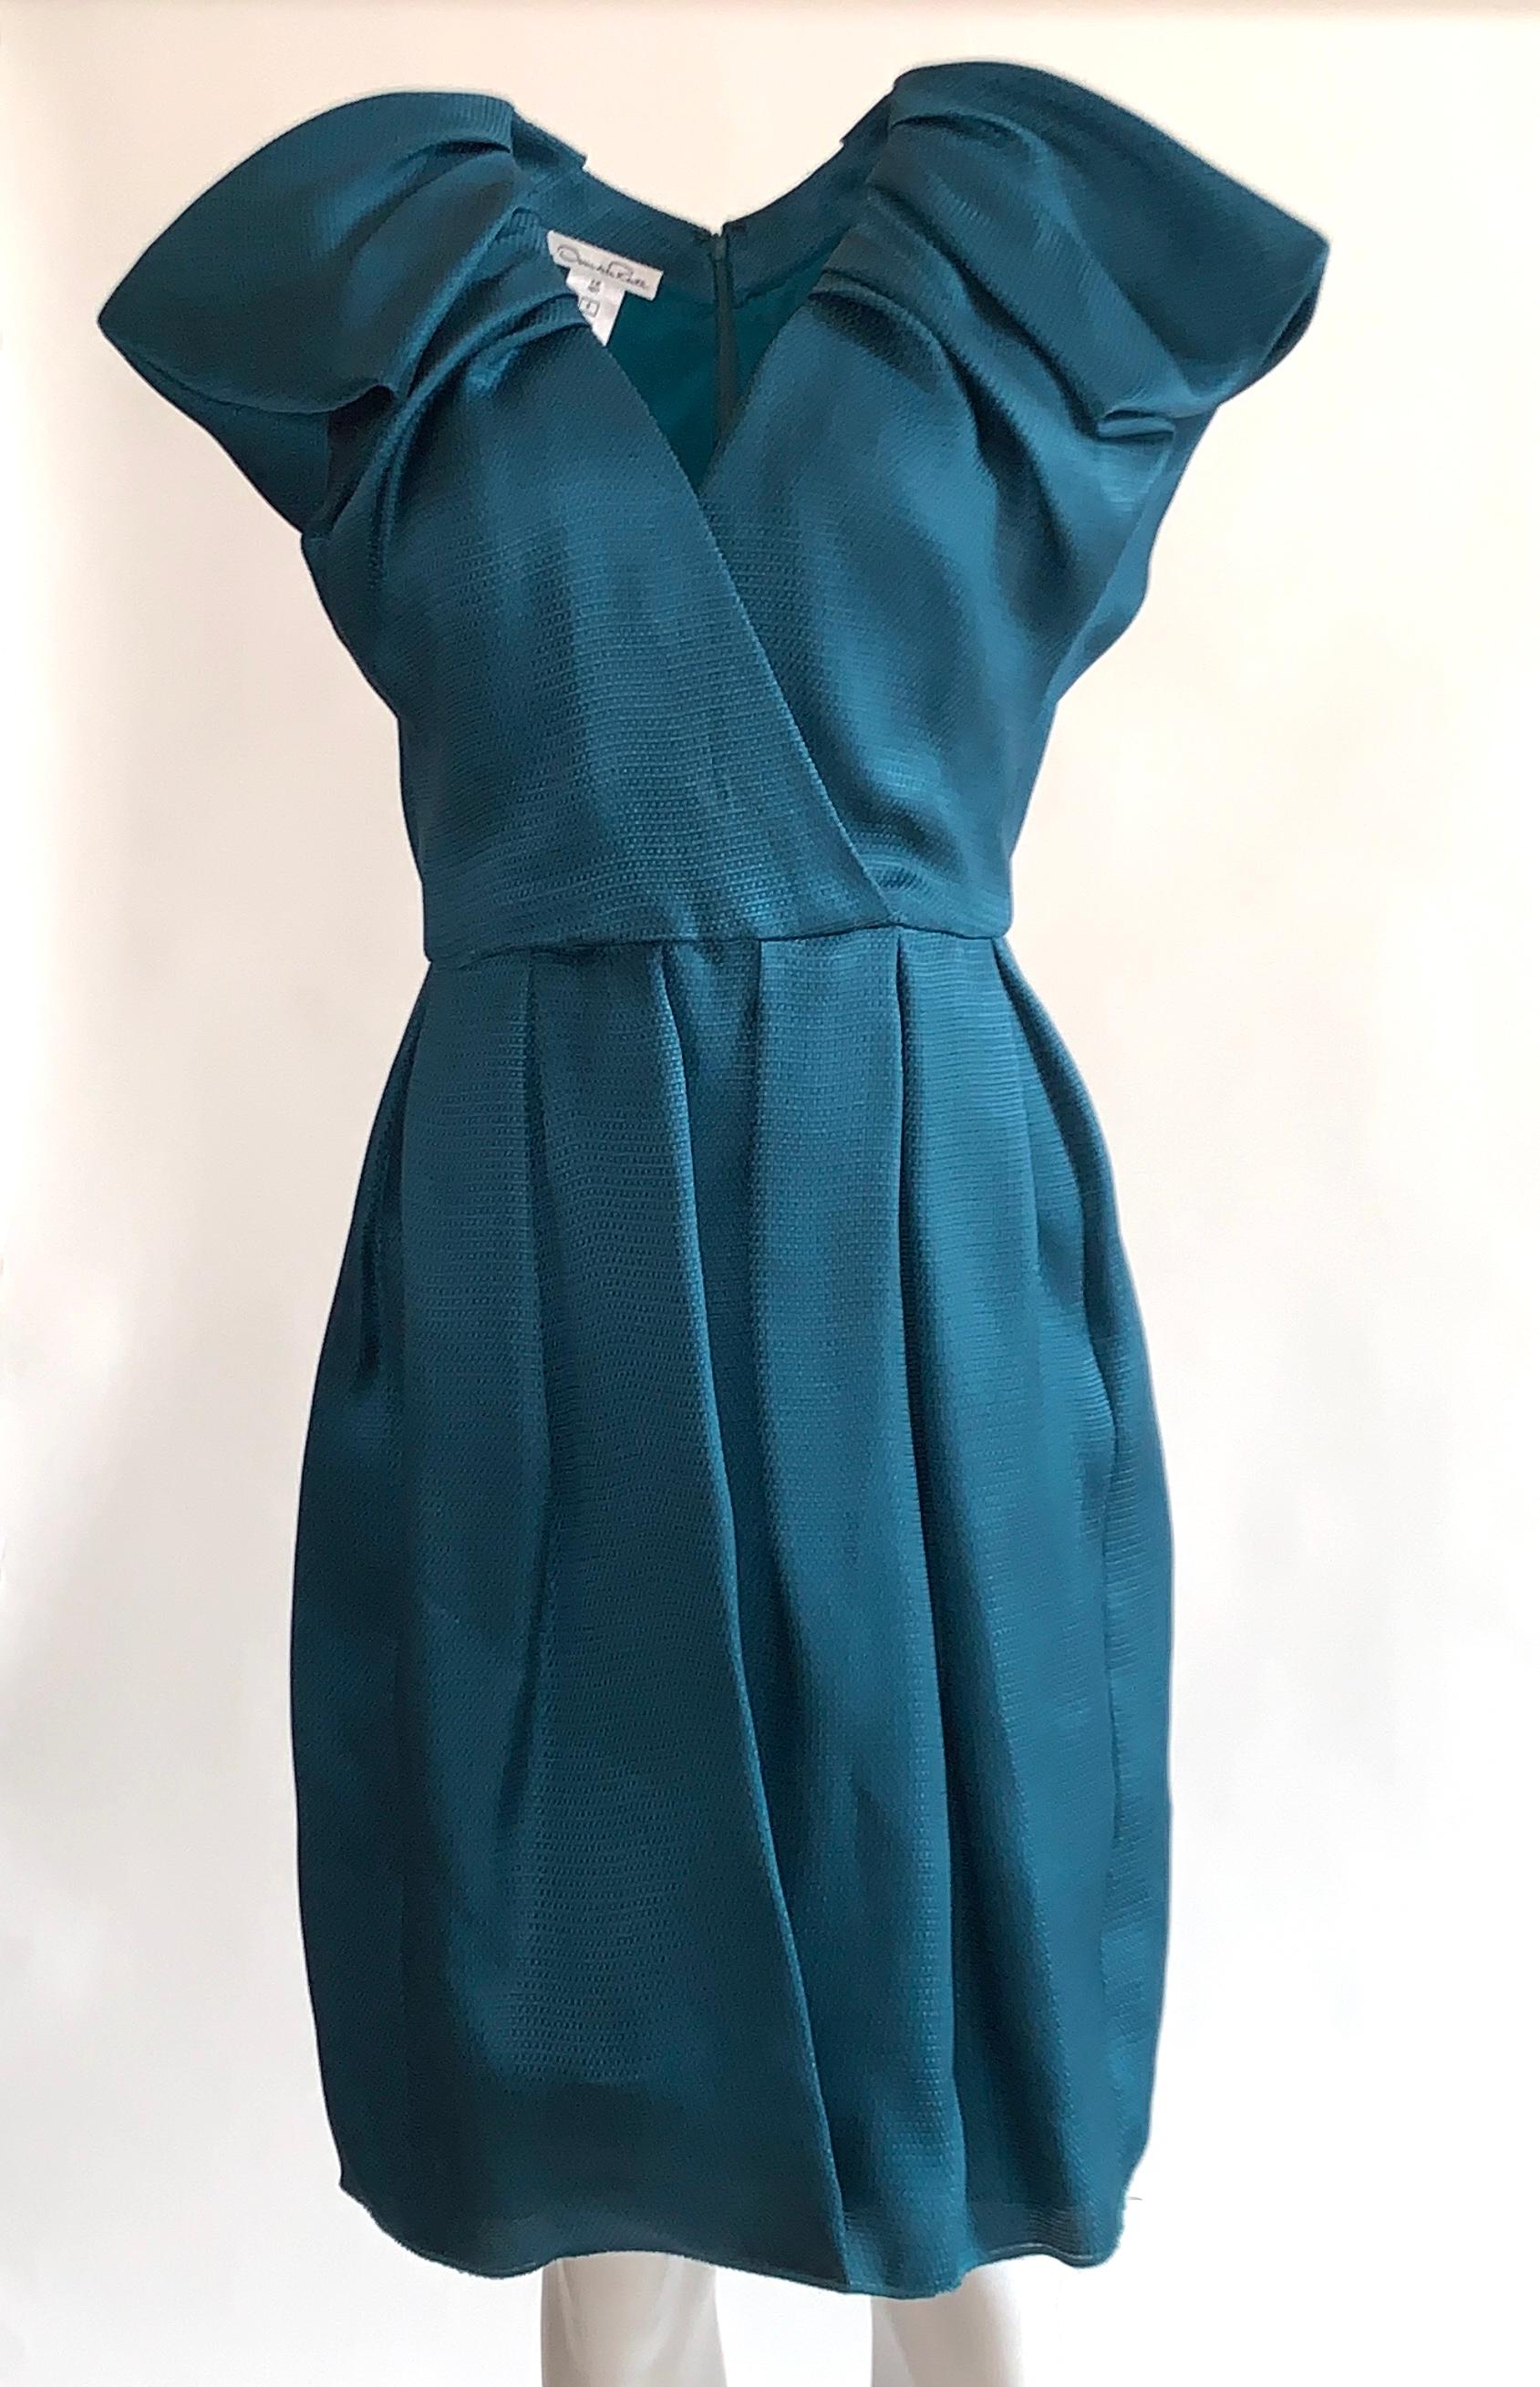 Oscar de la Renta teal dress in a gorgeous woven silk with dramatic pleating and an unfinished hem (stitched but not folded) detail. Back zip and hook and eye.

Look 29 on the Spring 2010 runway.

100% silk. Fully lined.

Made in USA.

Size 8. 
Bust